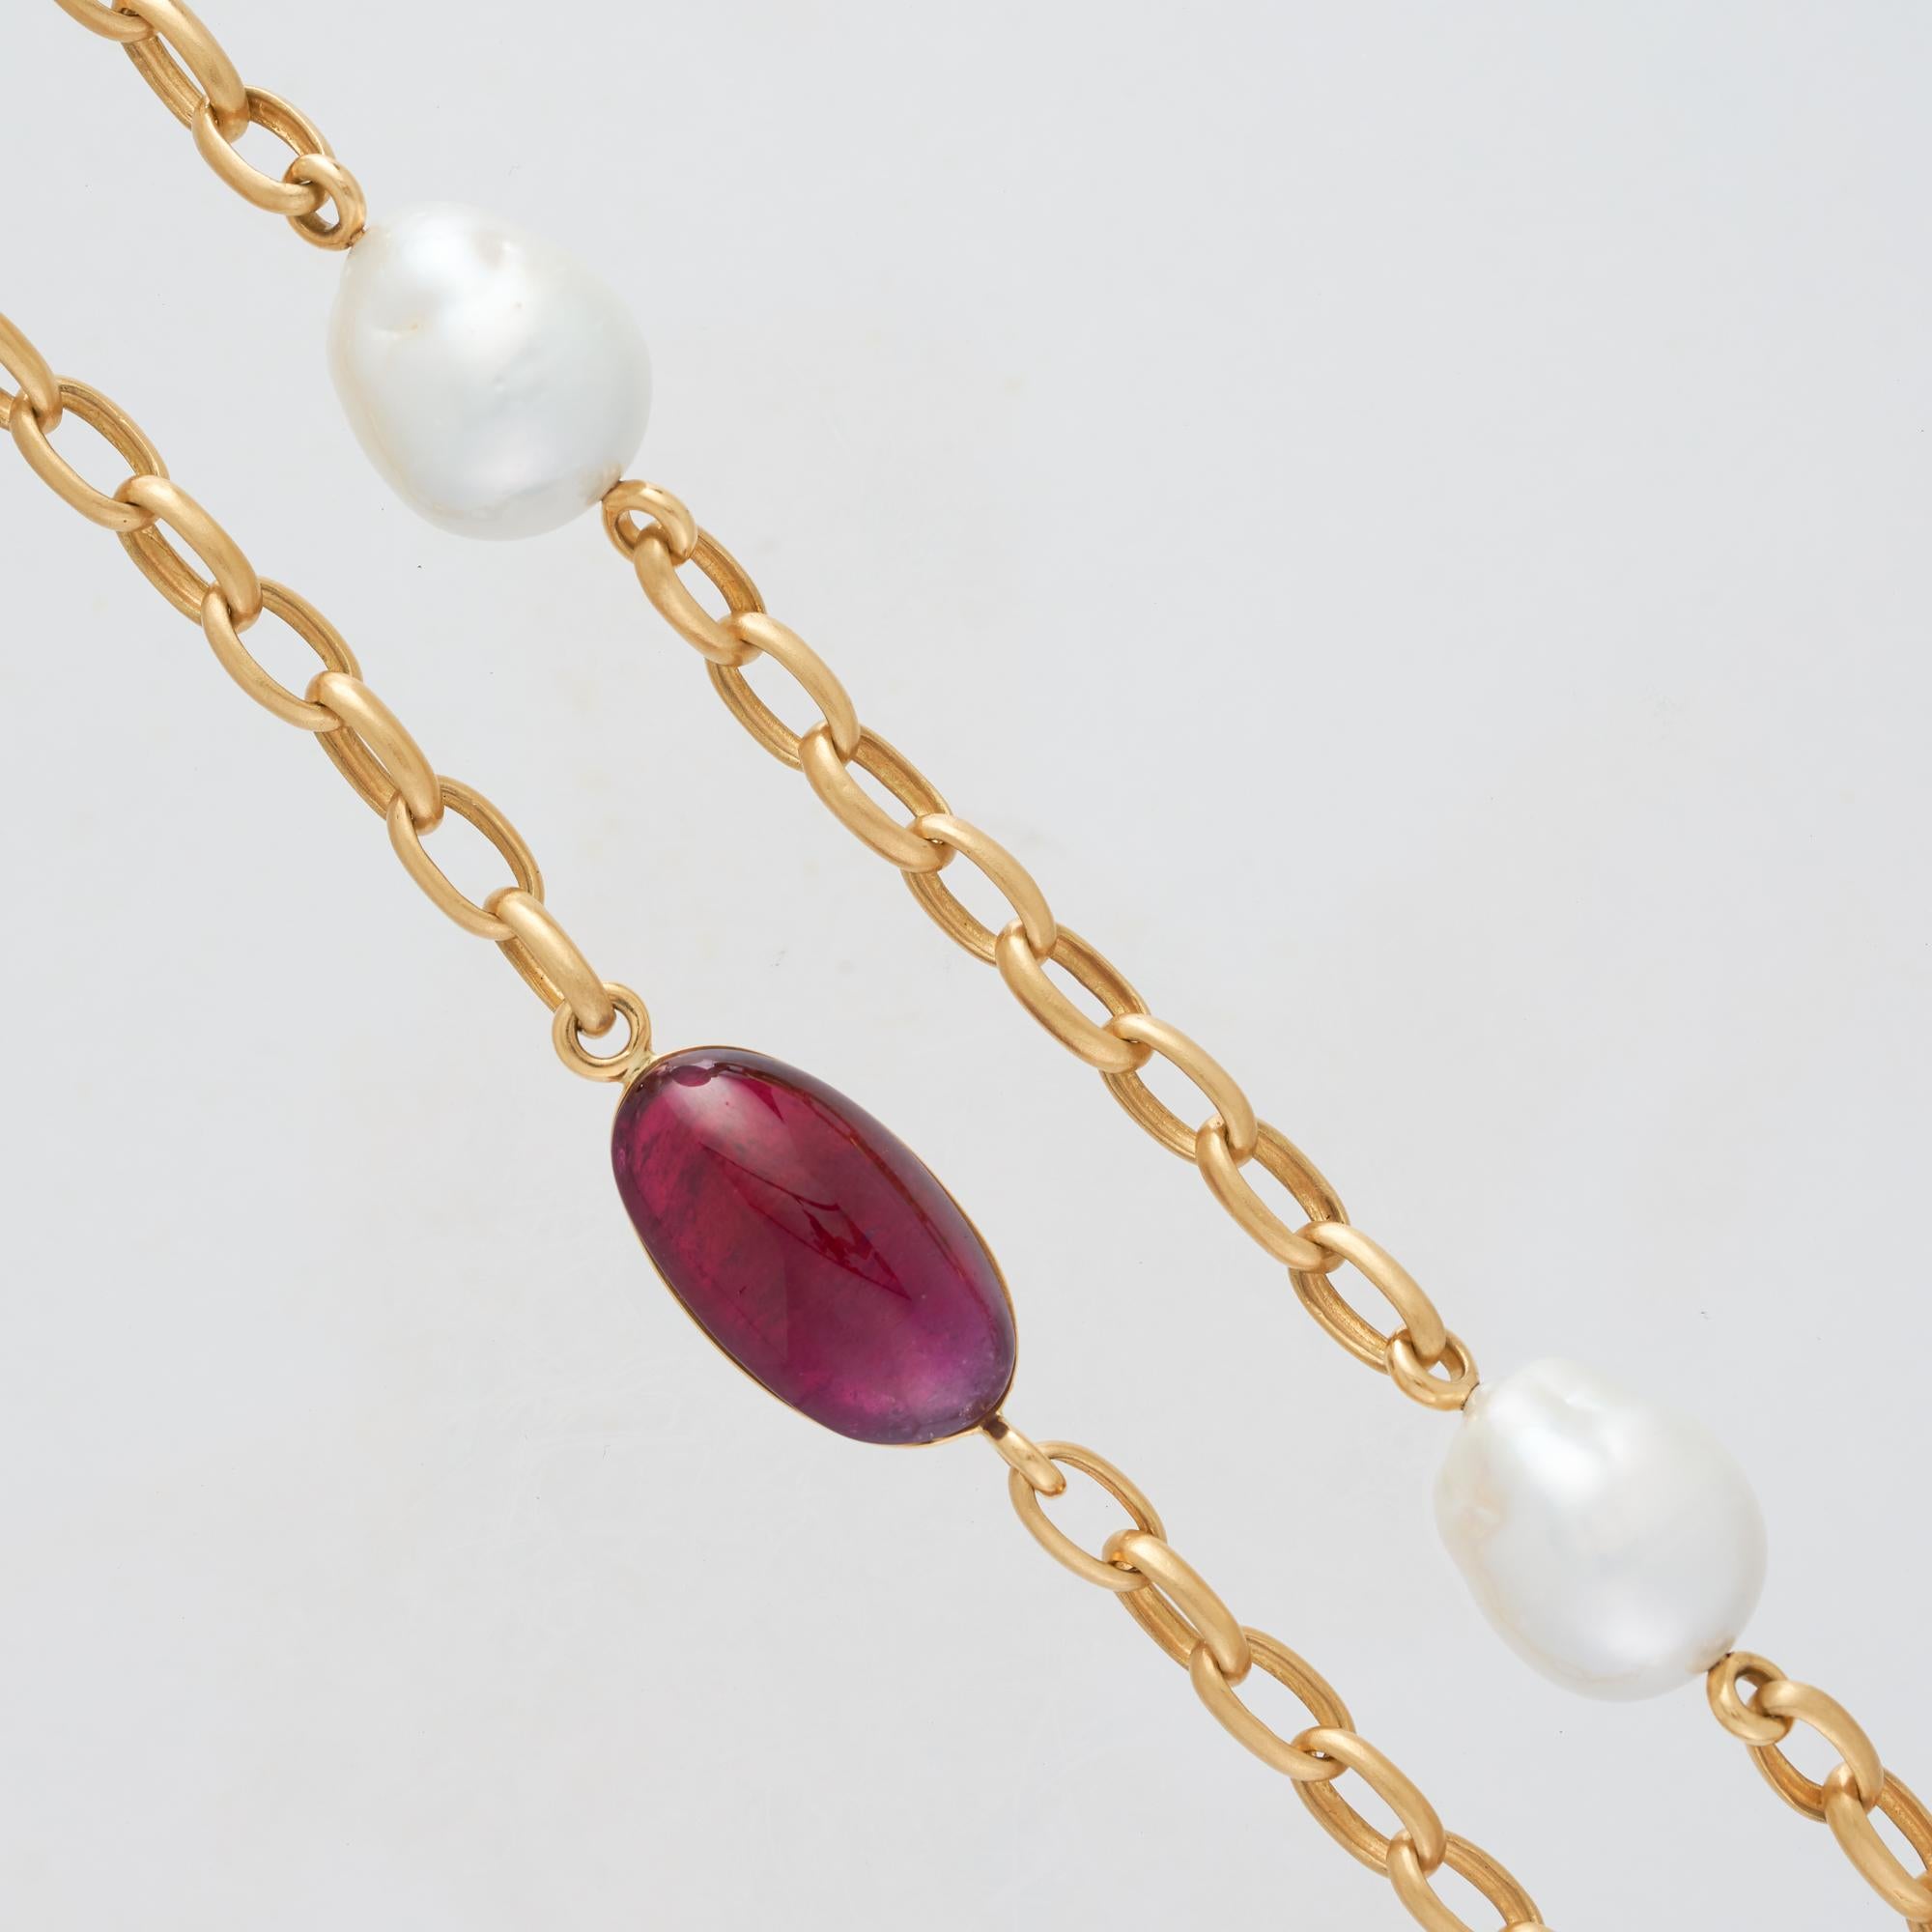 Margot McKinney 18 karat Yellow Gold South Sea Pearl and Amethyst Necklet featuring 6  Baroque South Sea Pearls 15mm+, 2 Amethyst  Pebbles average weight 43.44 carats and 2 Diamond Pebbles set with White Diamonds average weight 6.78 carats.
